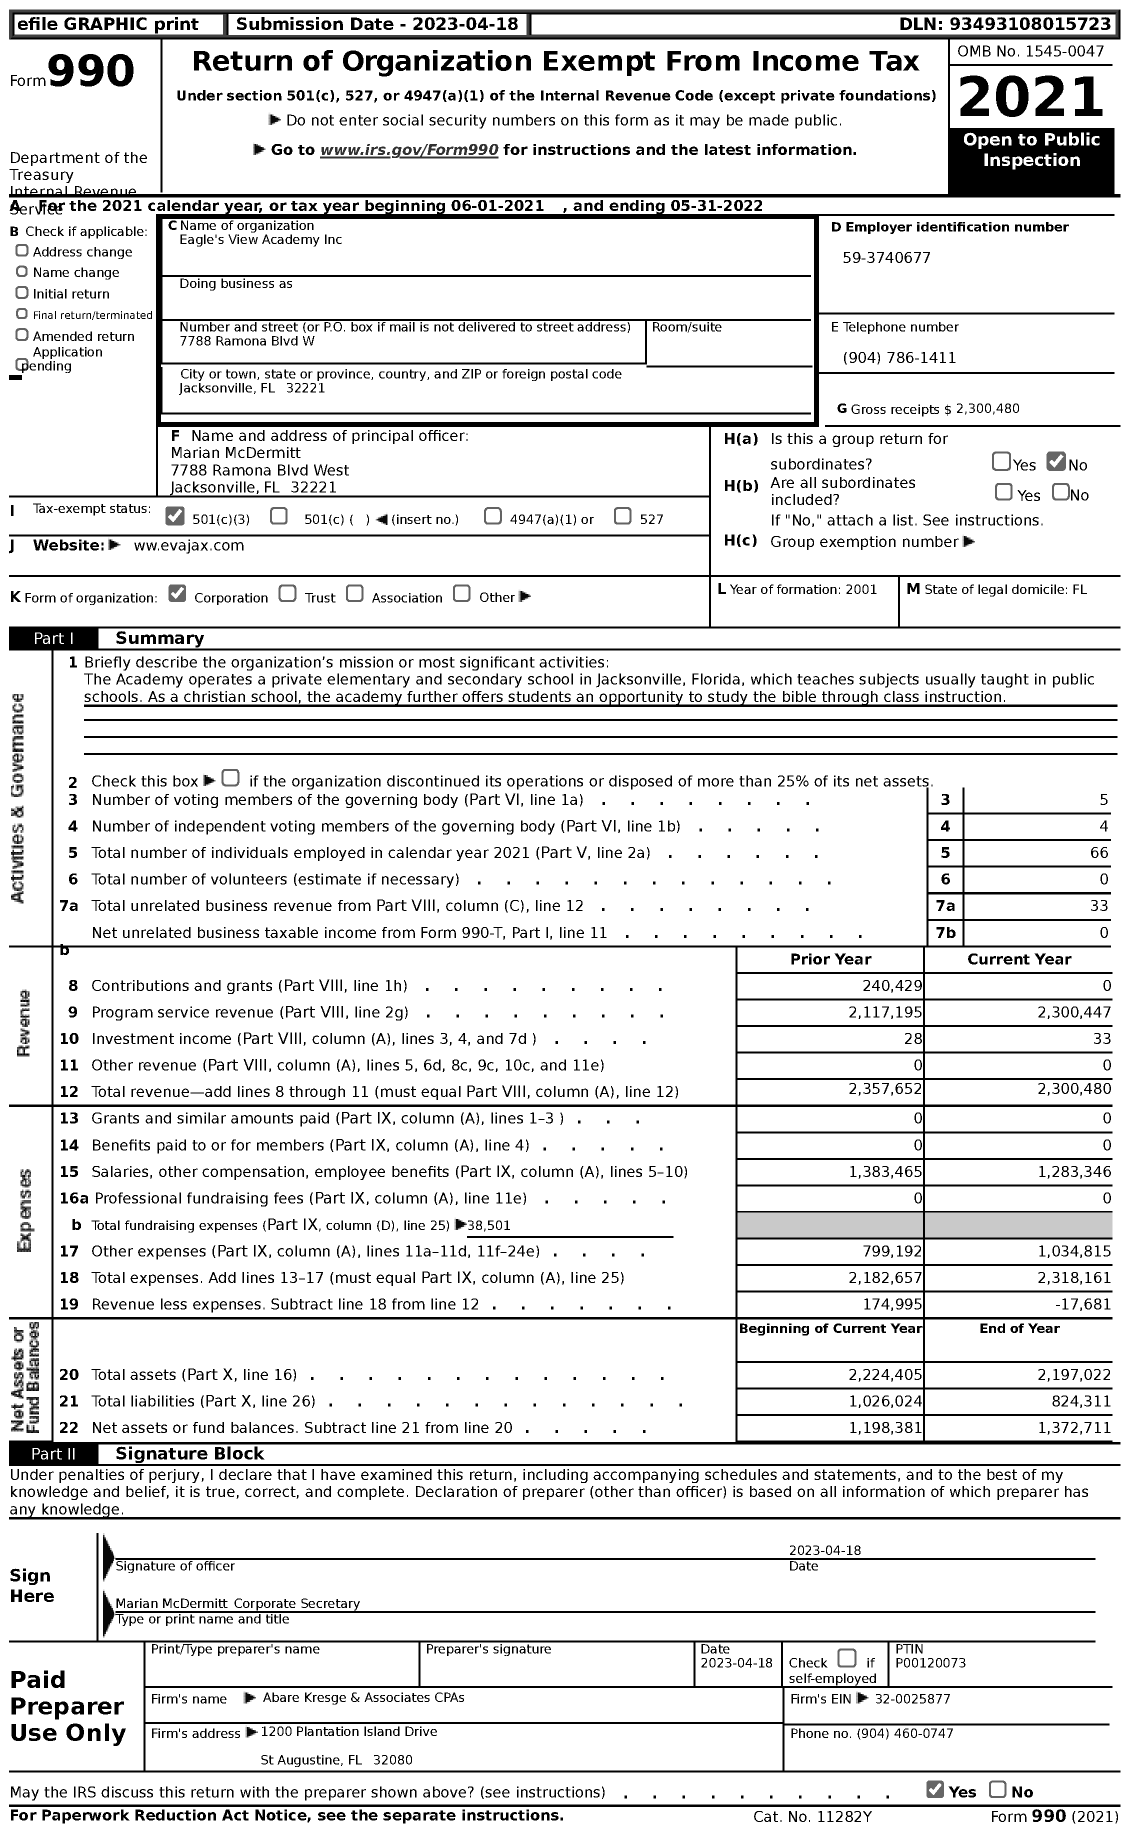 Image of first page of 2021 Form 990 for Eagle's View Academy (EVA)